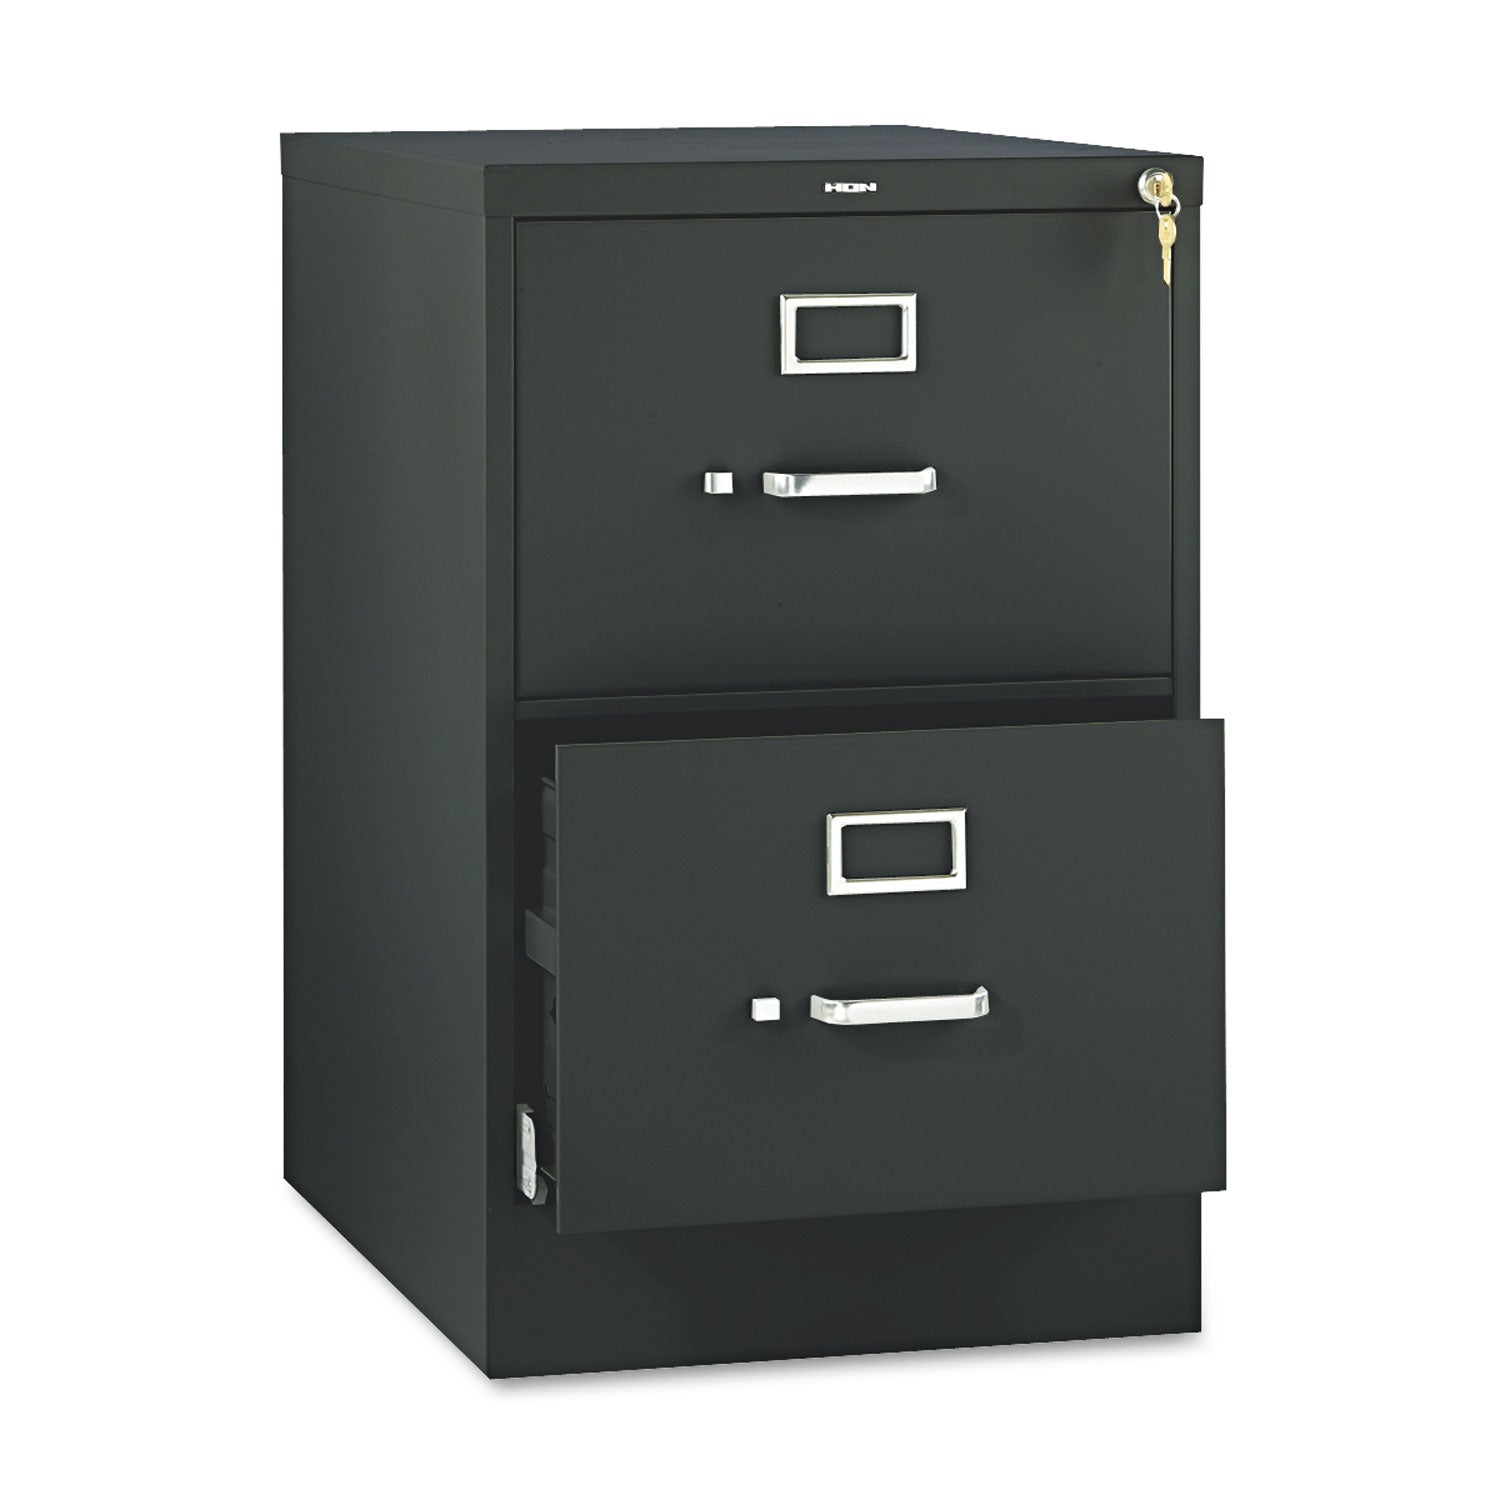 510-series-vertical-file-2-legal-size-file-drawers-black-1825-x-25-x-29_hon512cpp - 1